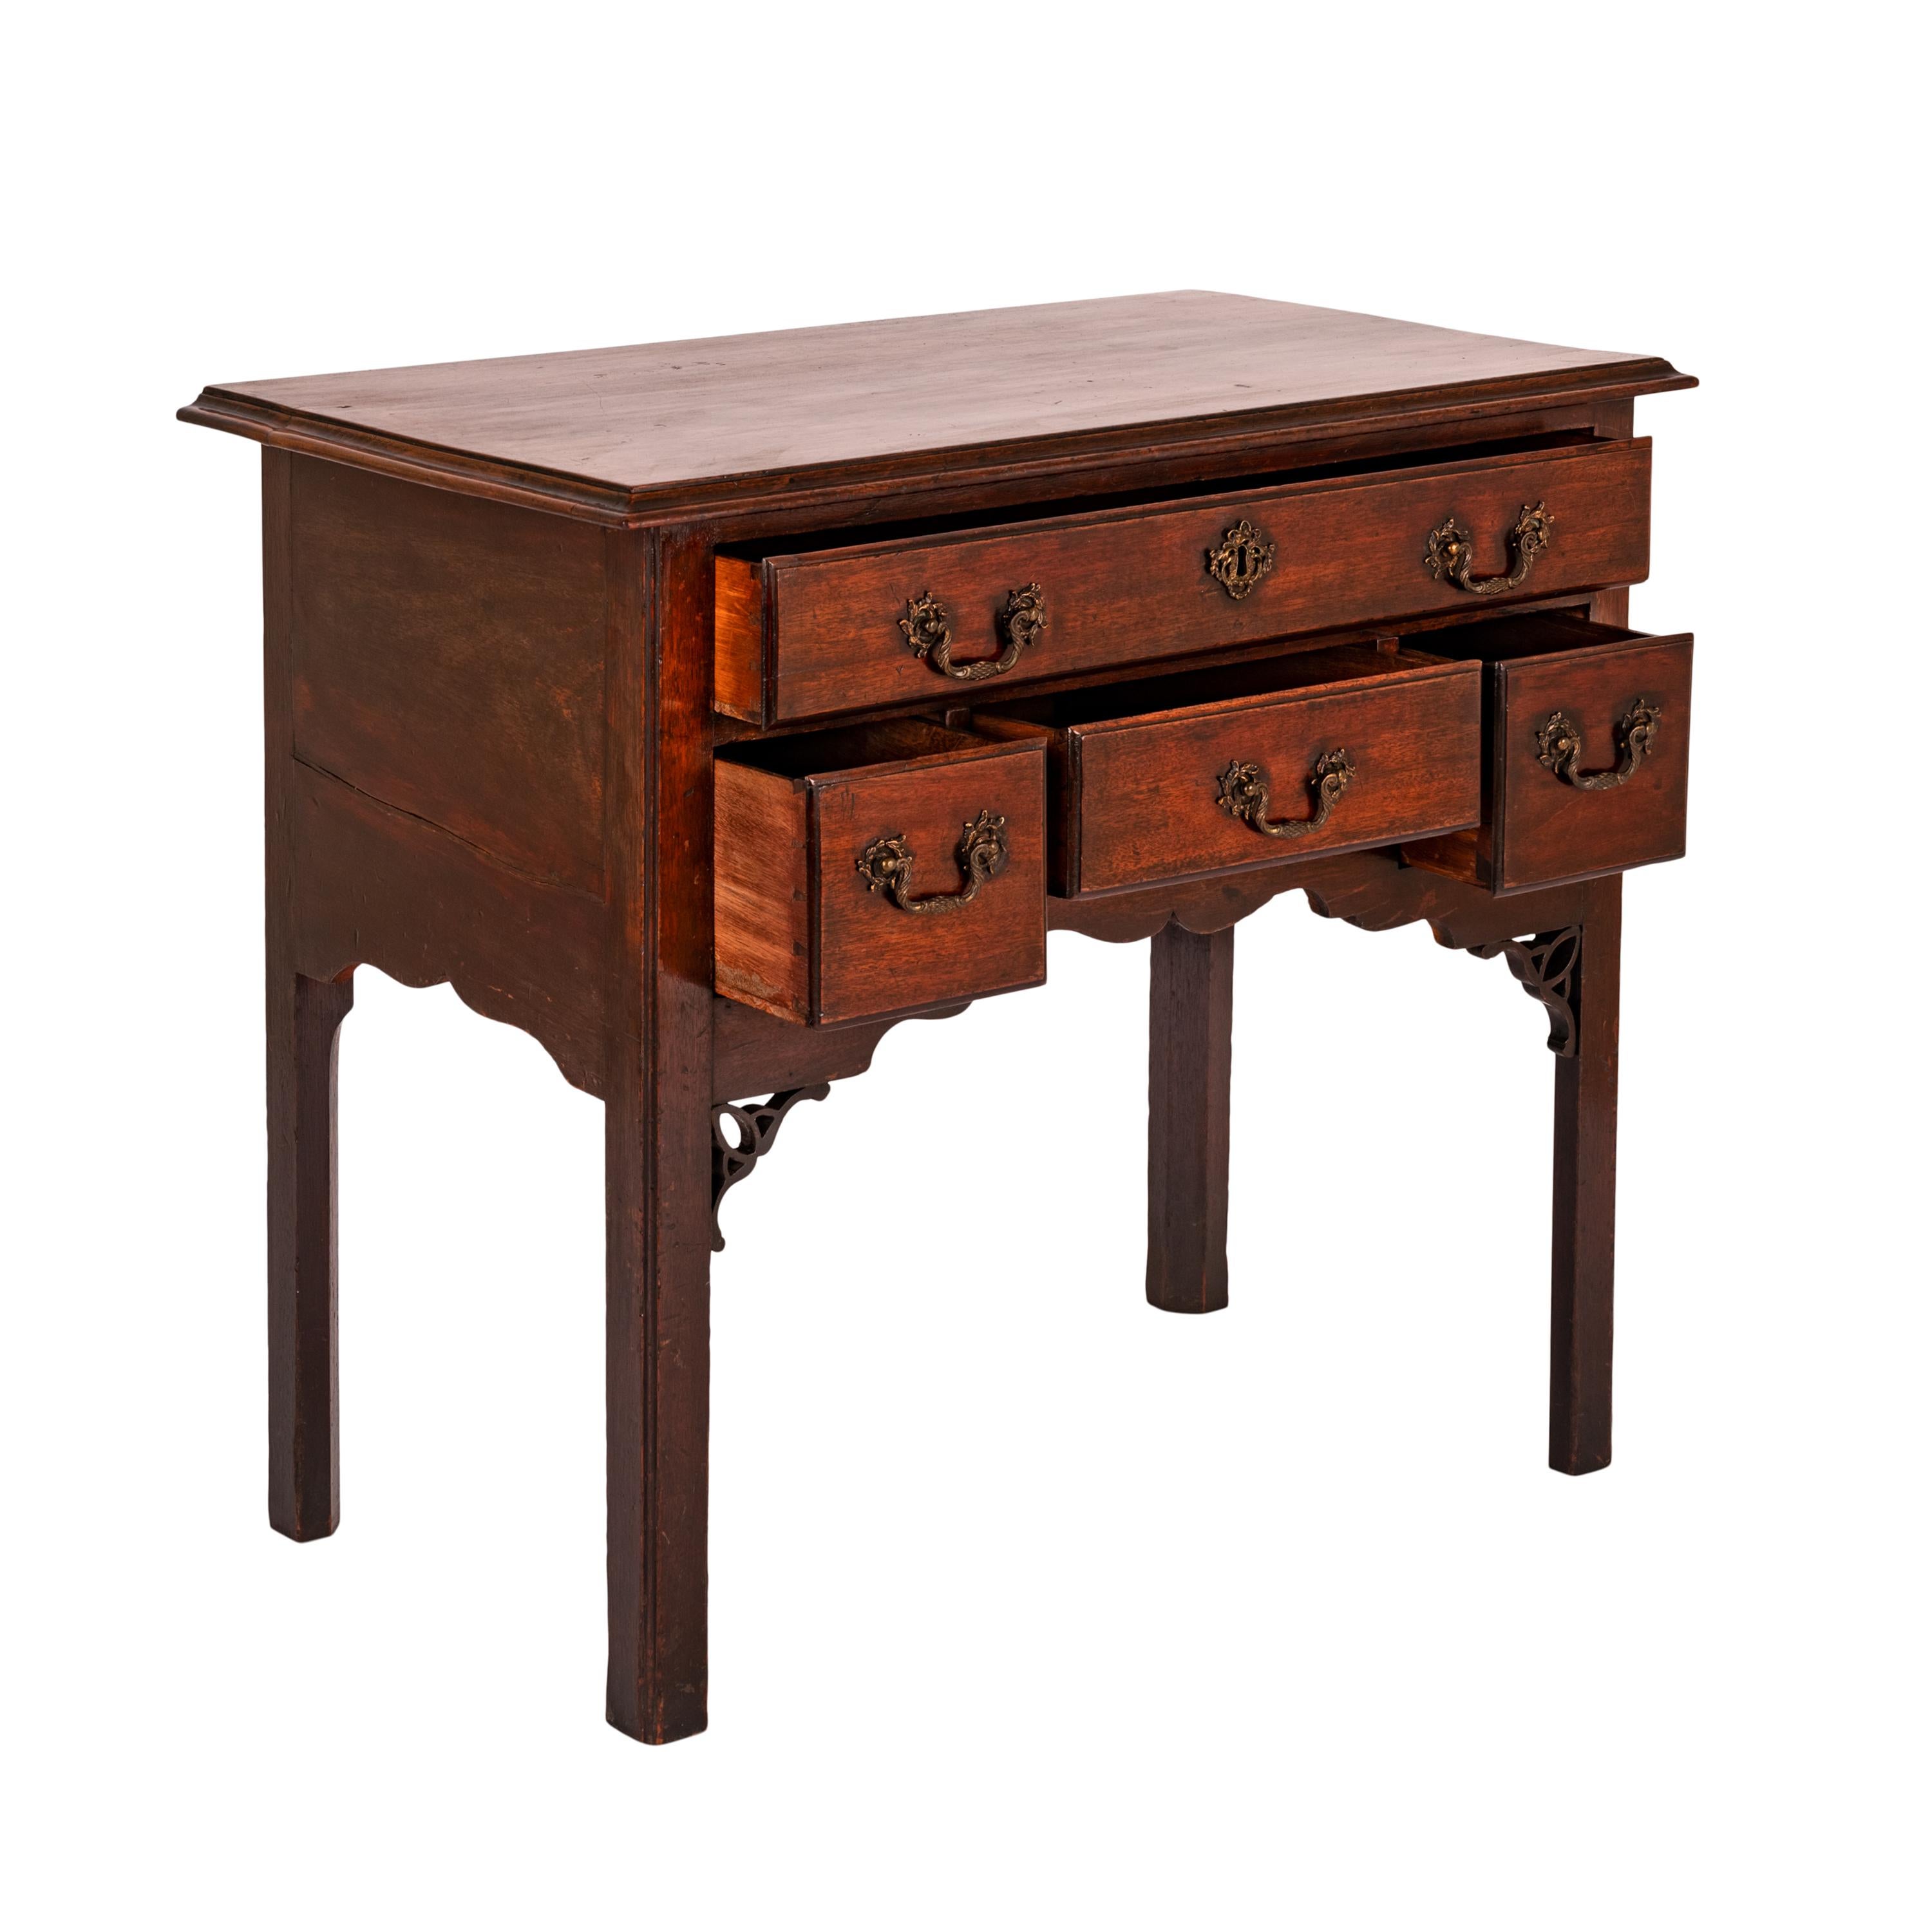 Brass Antique English 18th C Georgian Mahogany Chippendale Lowboy Side Table 1750 For Sale